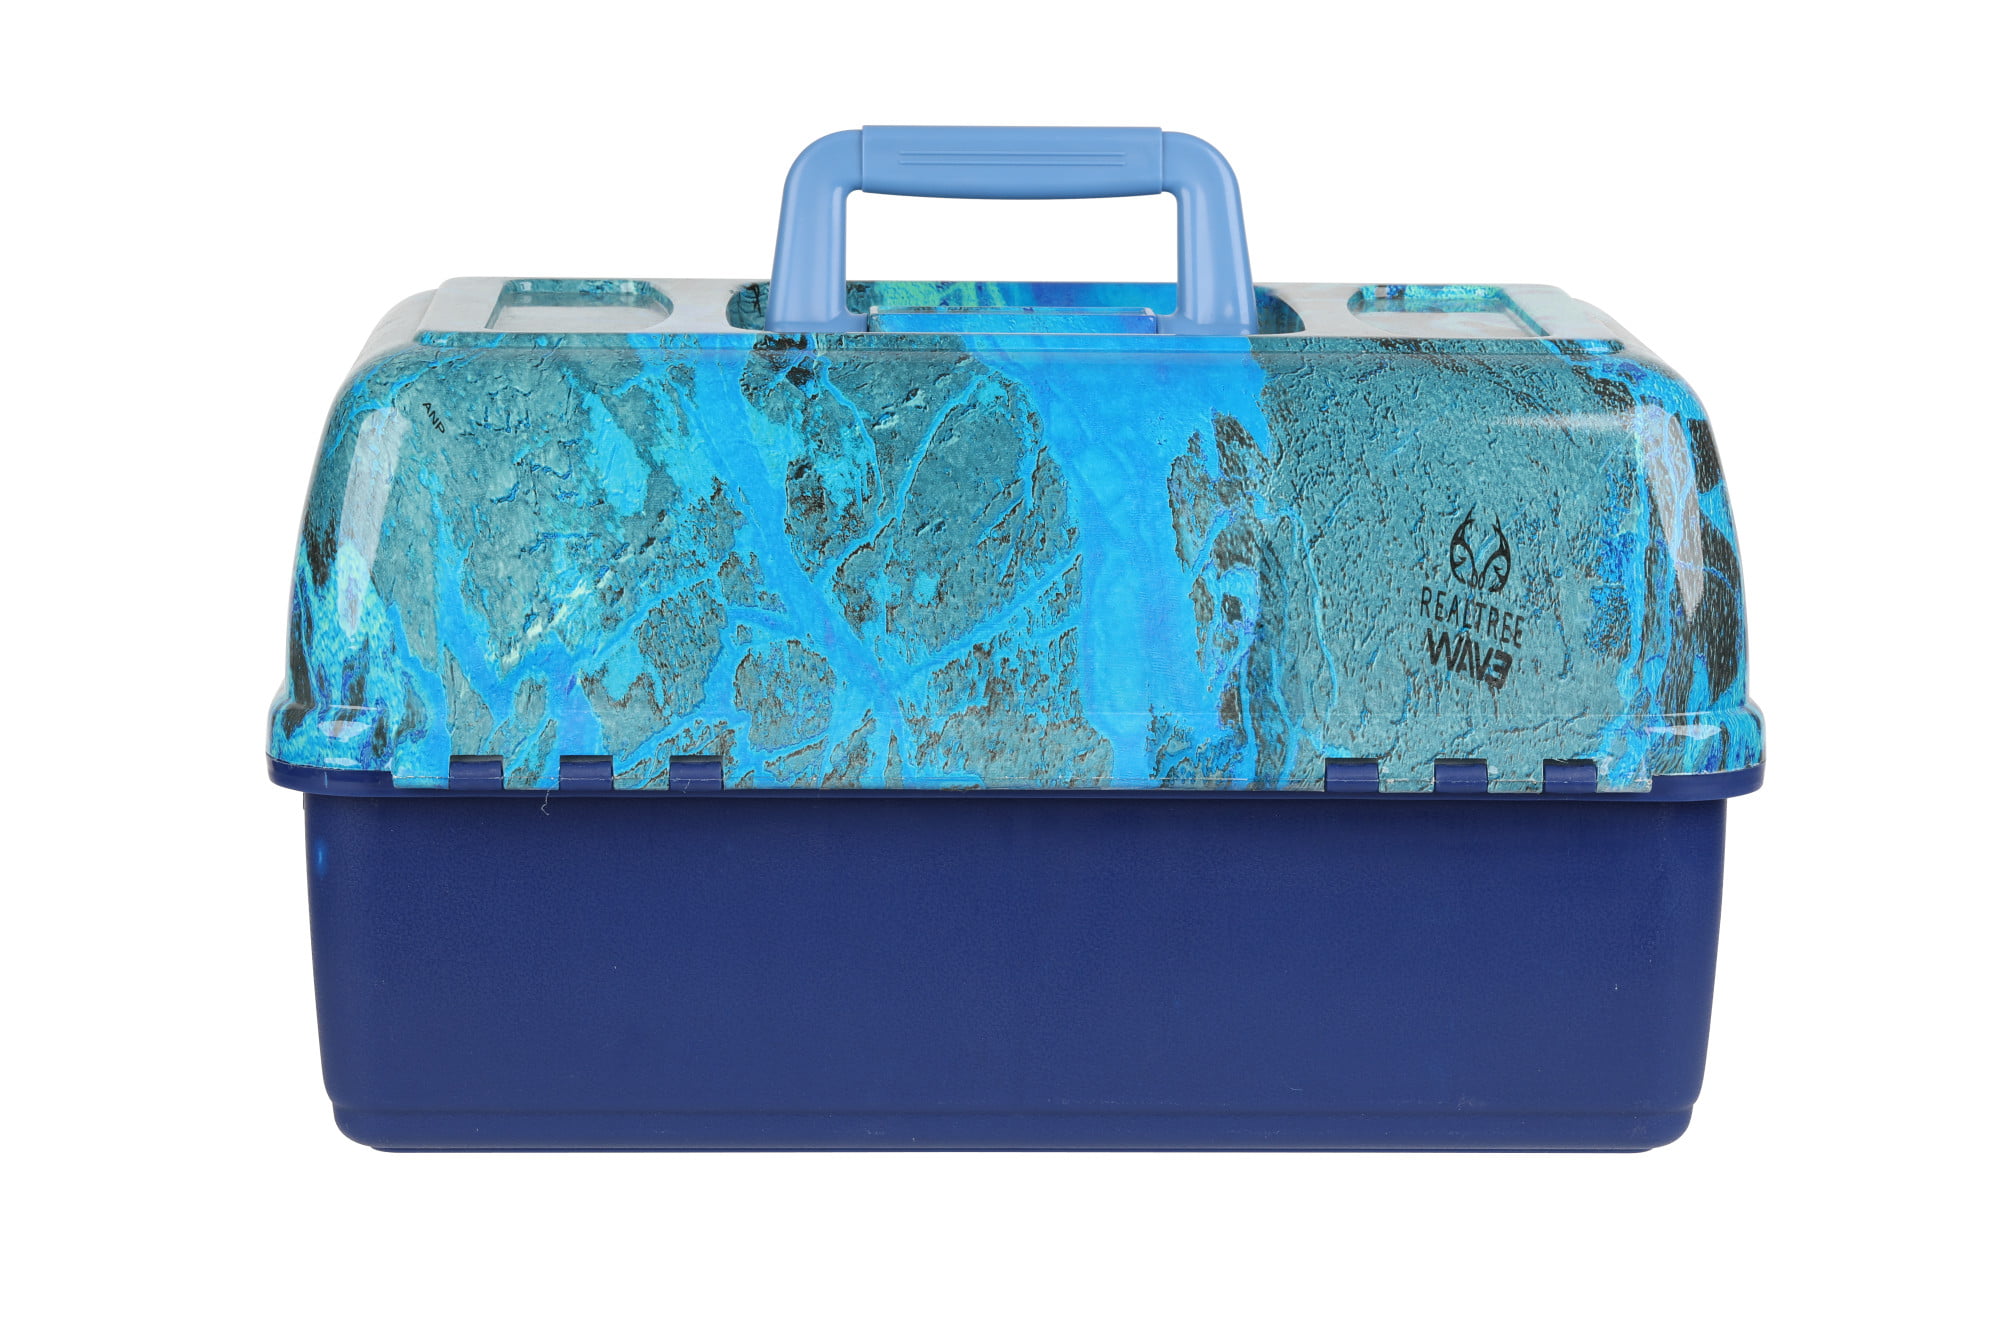 RealTree Fishing Tackle Box with Bluetooth Speakers in Blue Wave Design 